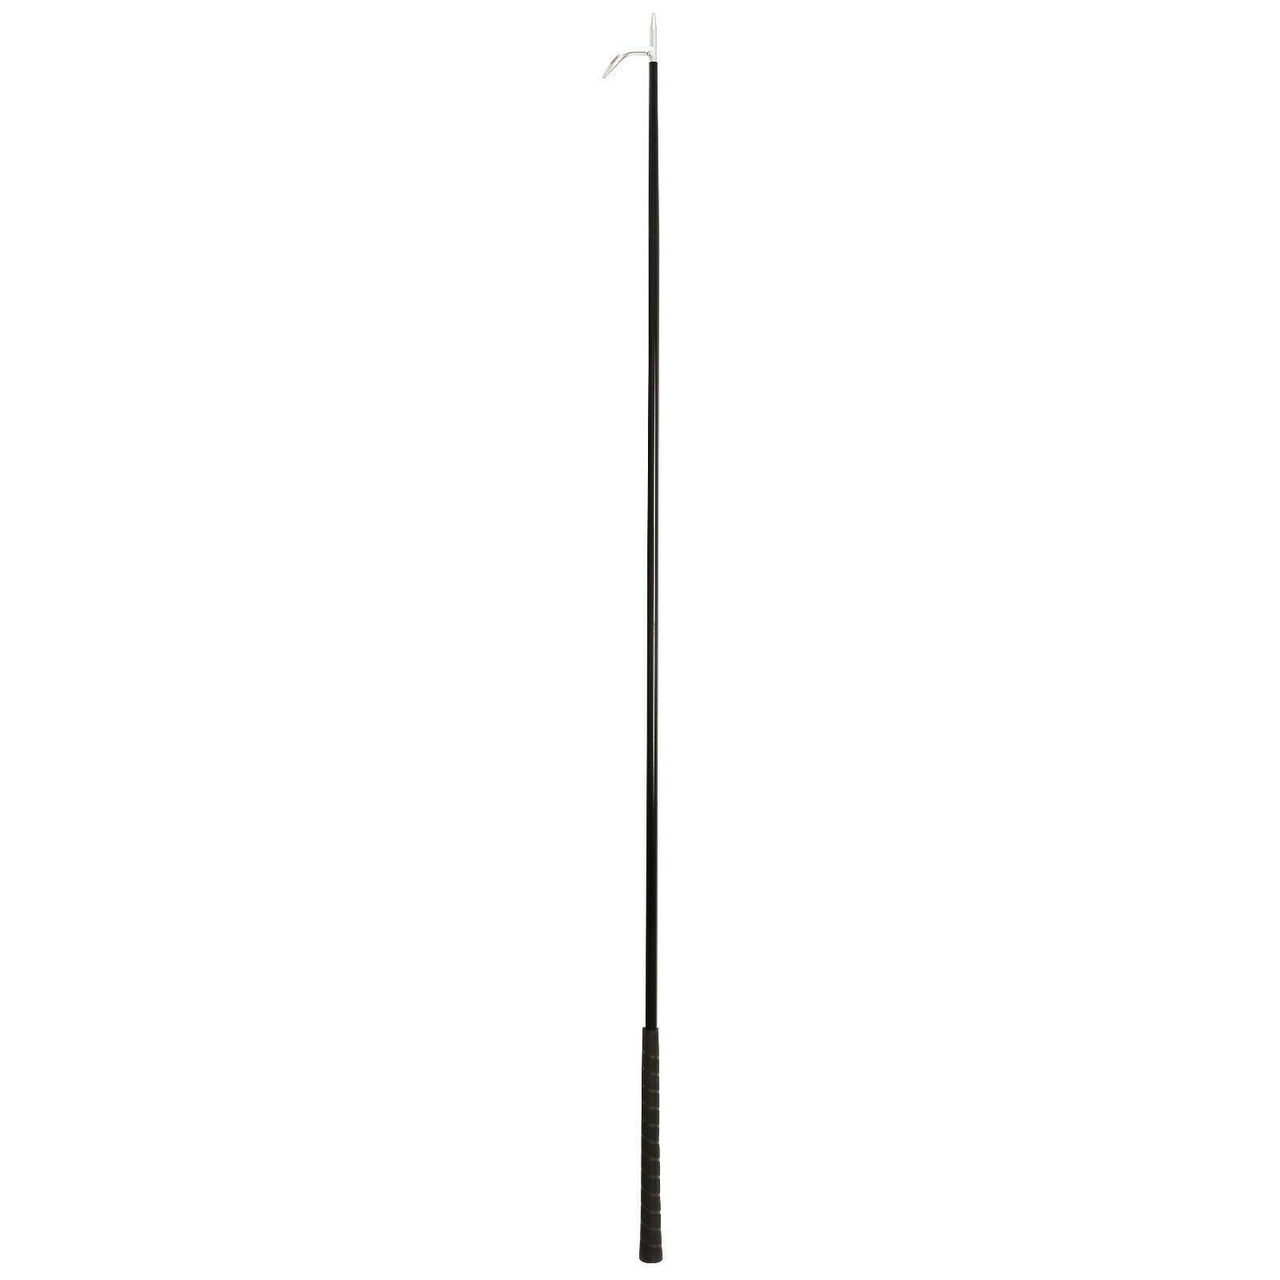 Weaver Leather Aluminum Cattle Show Stick with Handle  - 54"